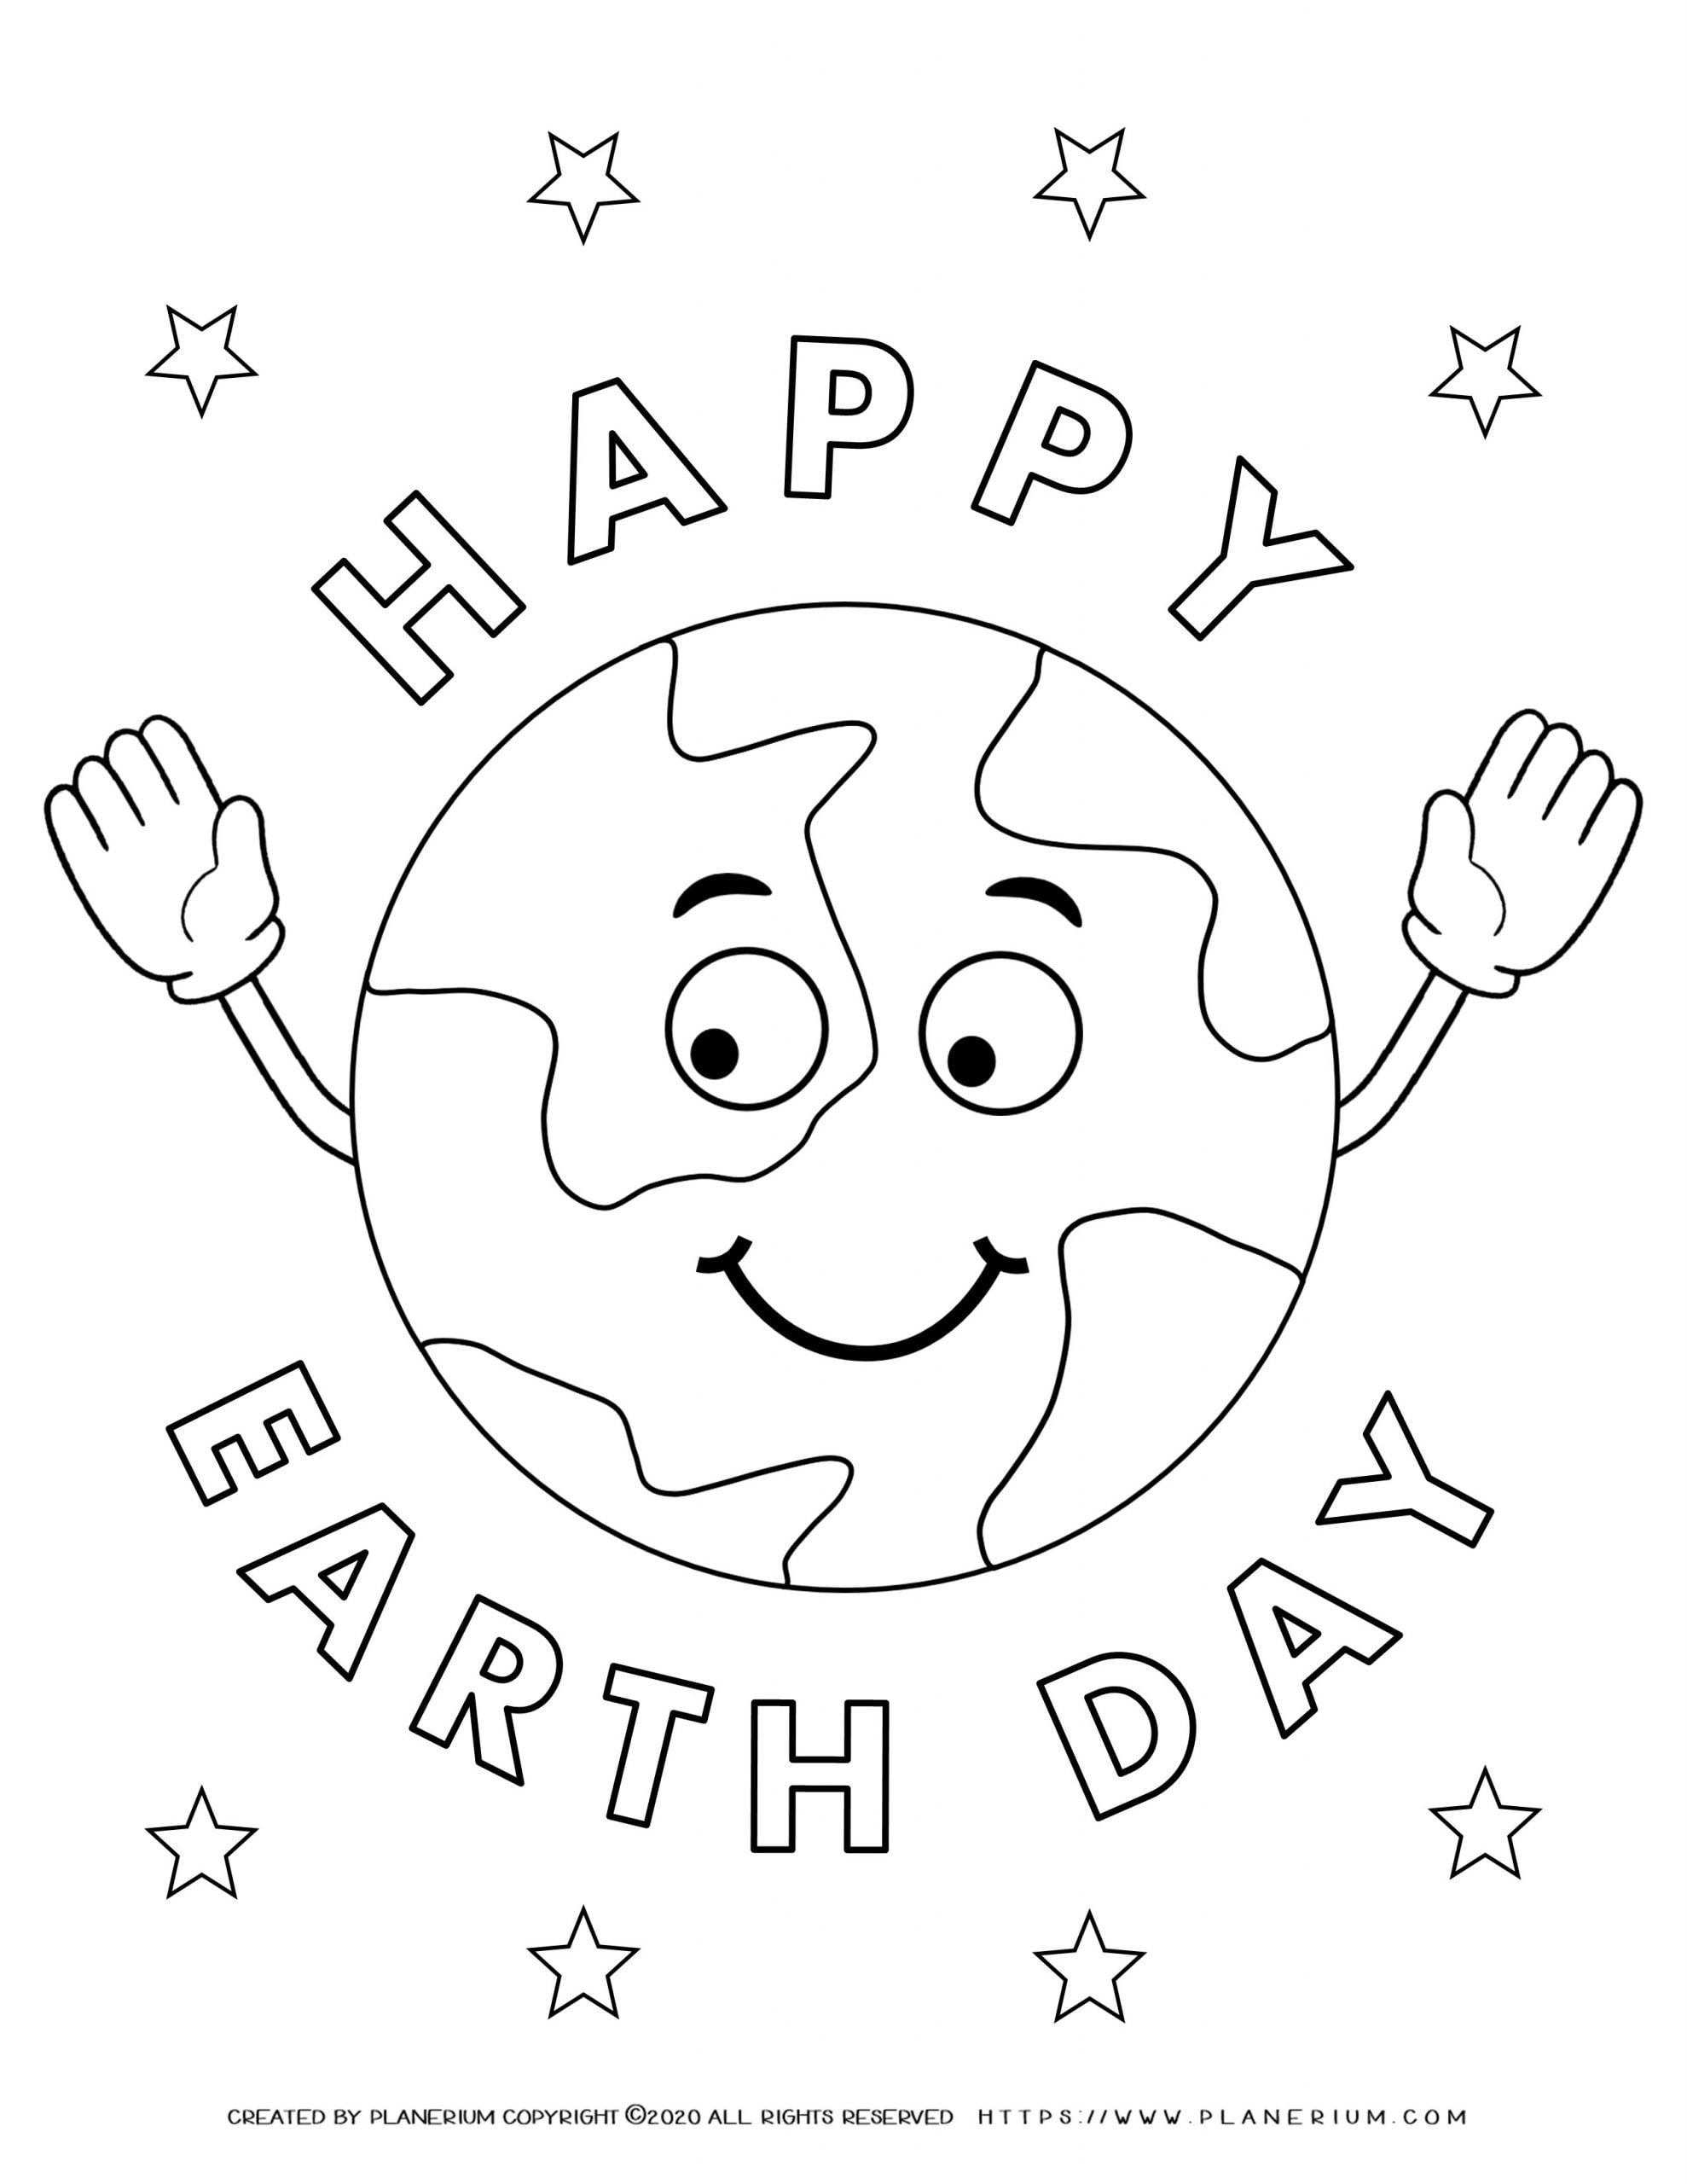 Earth day - Coloring page - Happy Earth Day